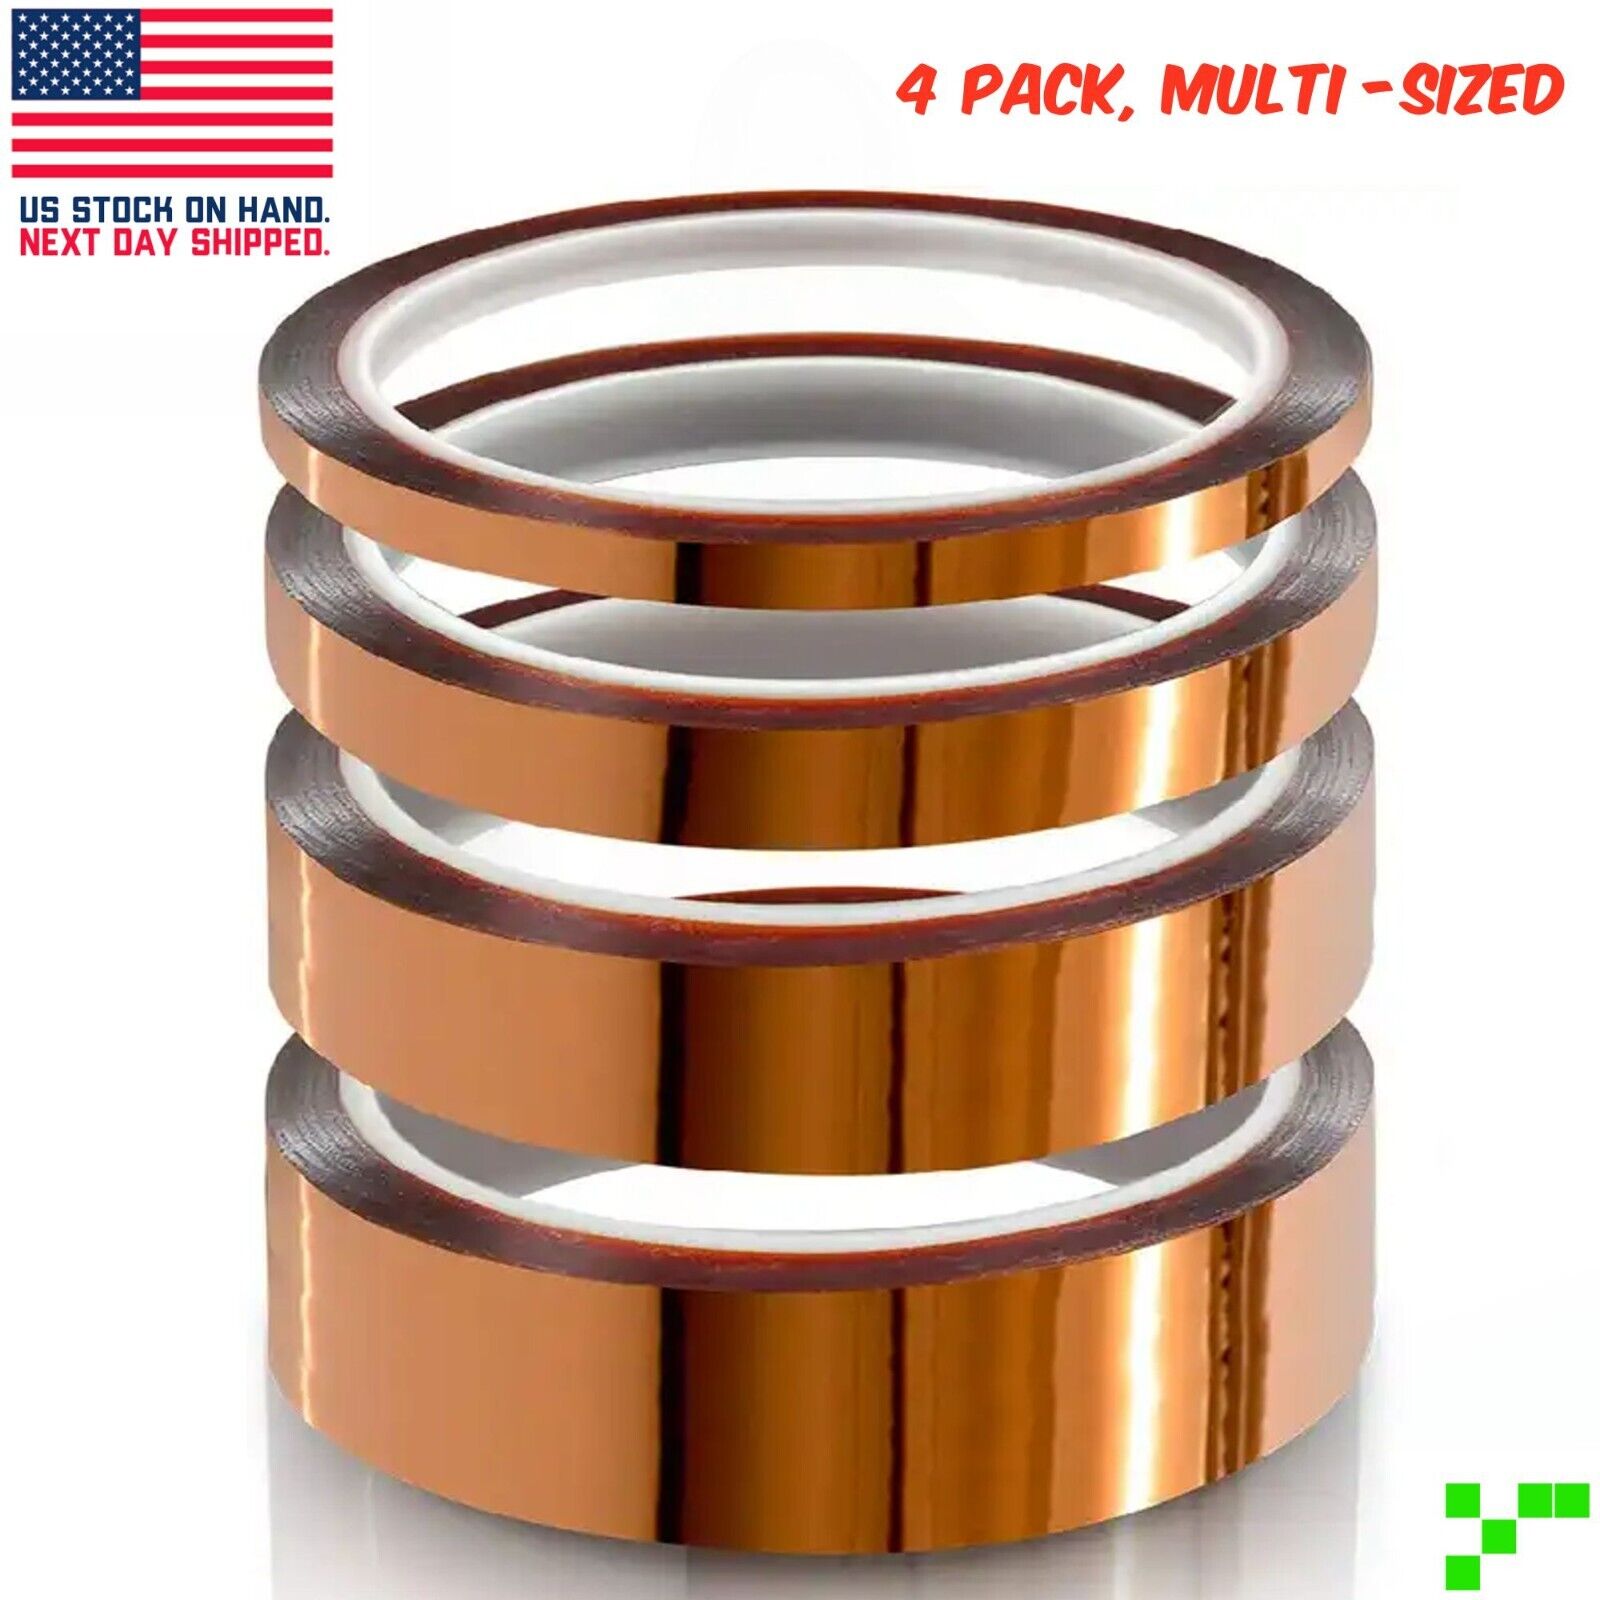 4x Polyimide High Temperature Tape Heat Resistant Kapton 1/8’’, 1/4